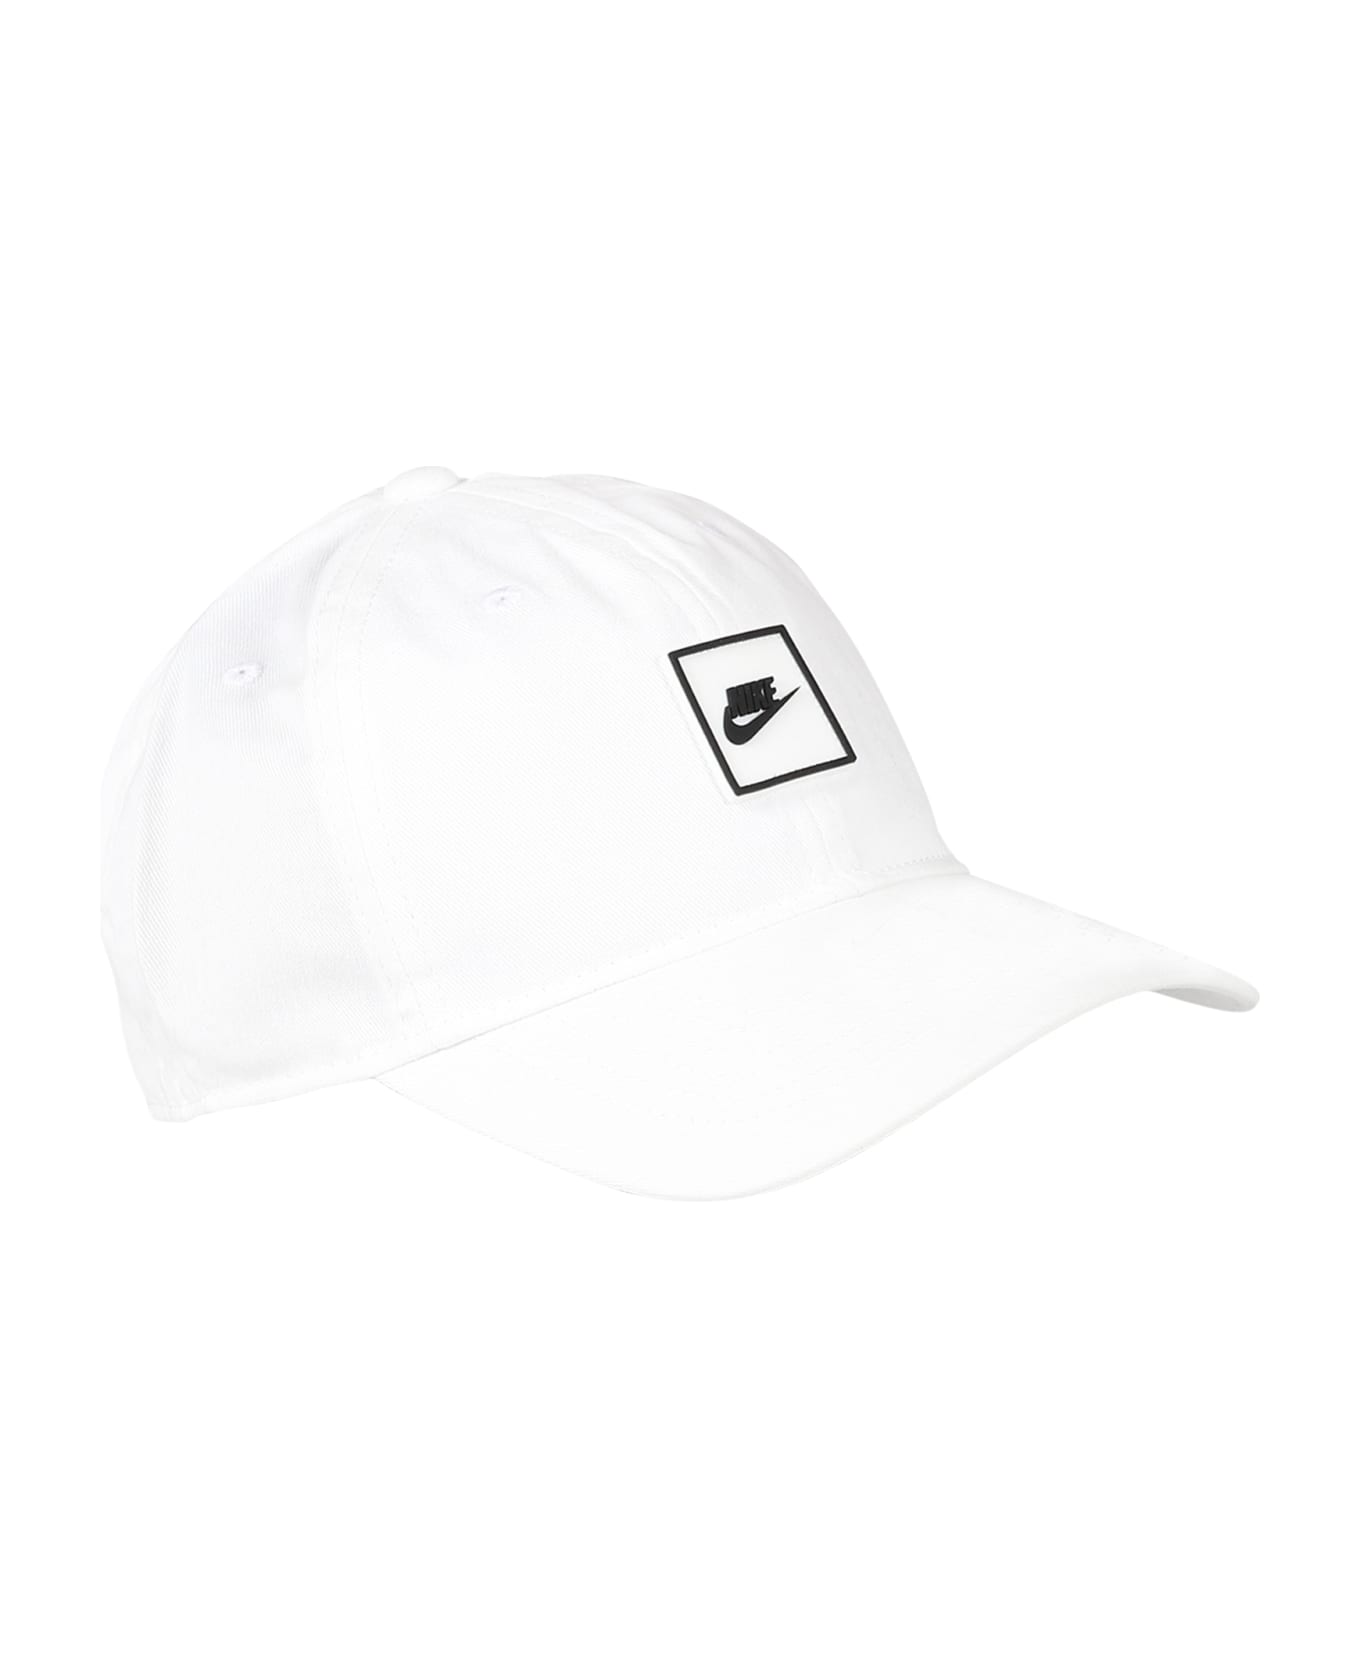 Nike White Hat For Kids With Logo - White